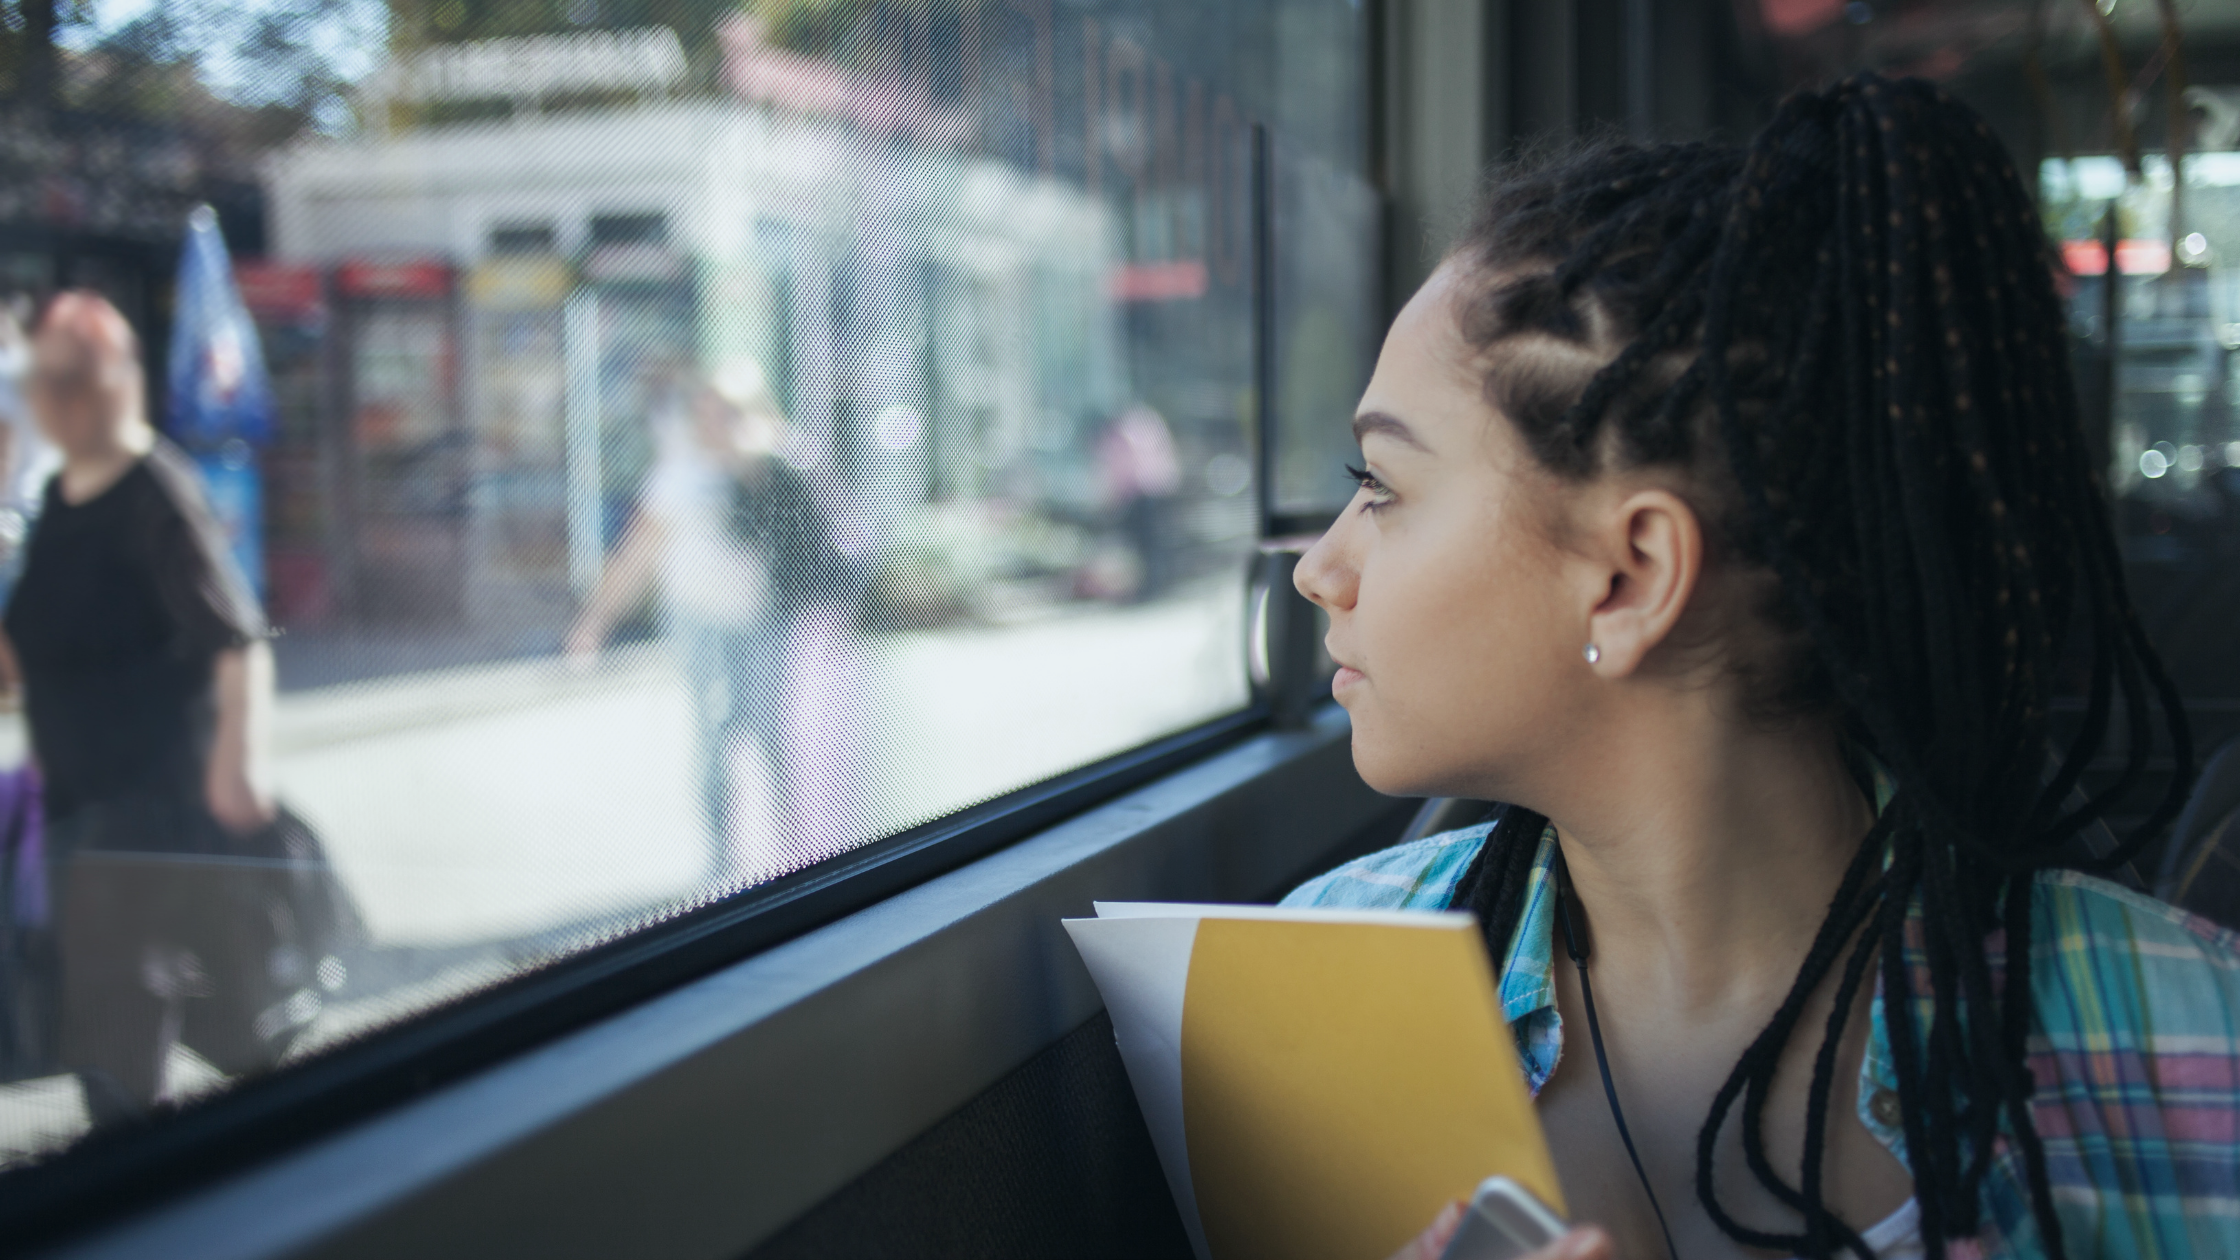 Image of a teen girl looking out a bus window with overlaid text: Youth Perspectives on Transit: Increasing Access and Utilization